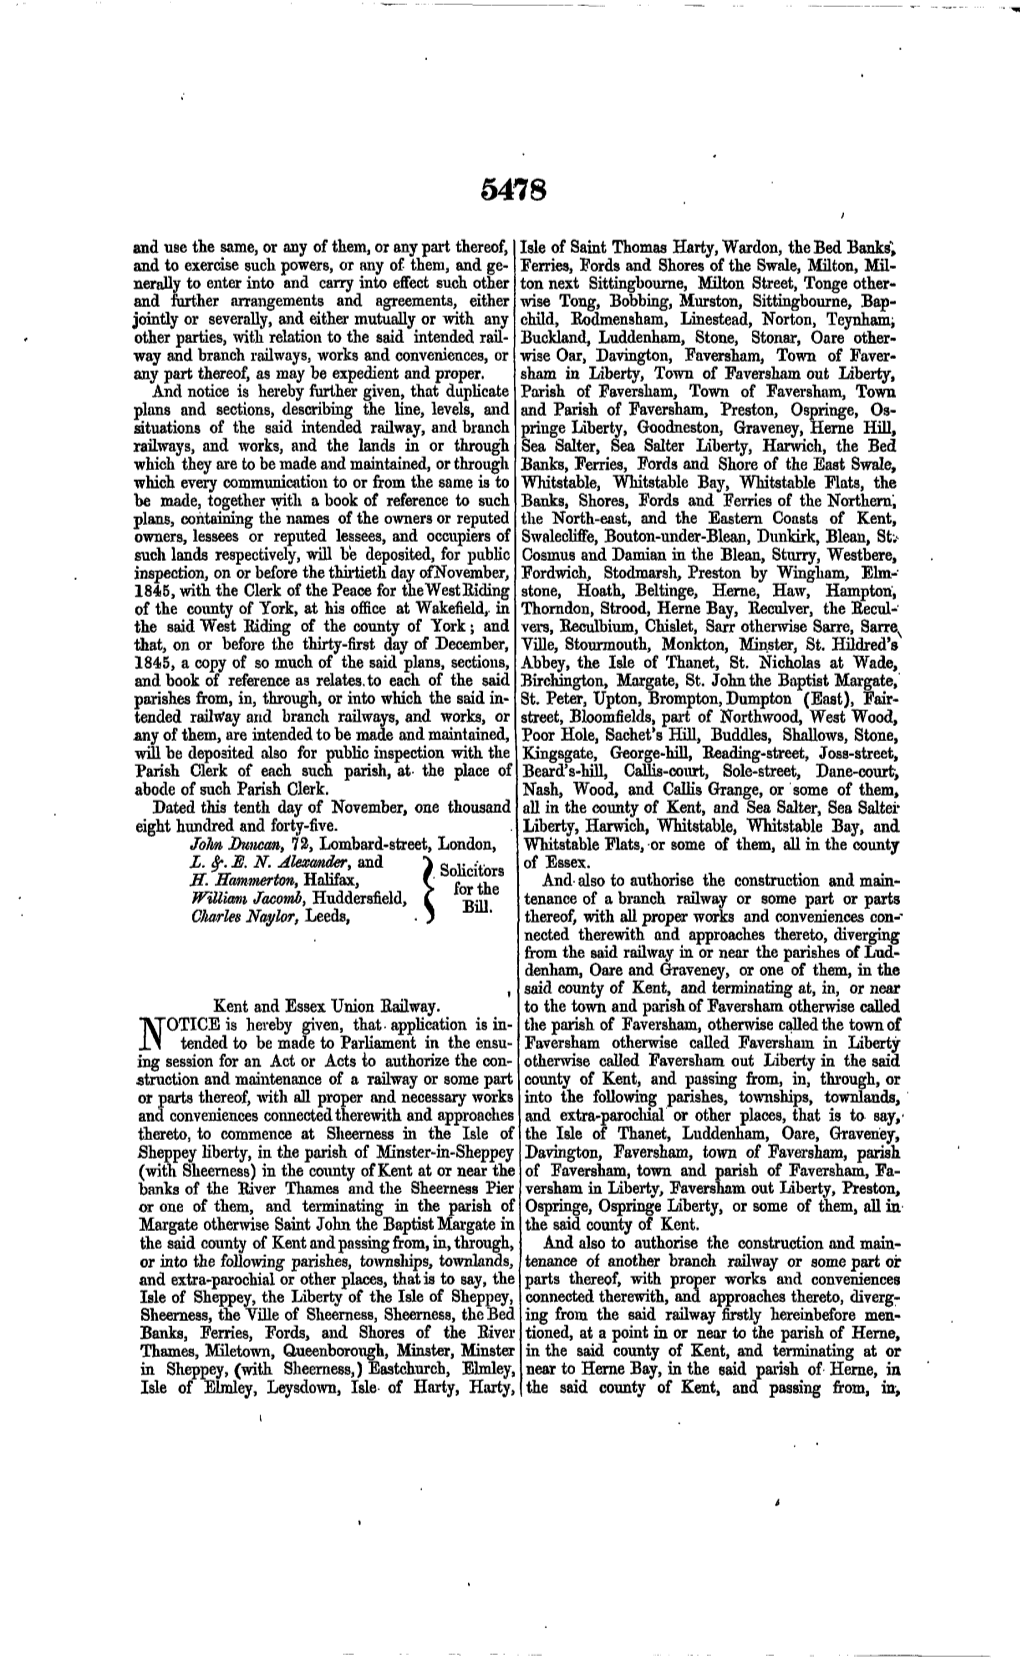 The London Gazette, Issue 20539, Page 5478